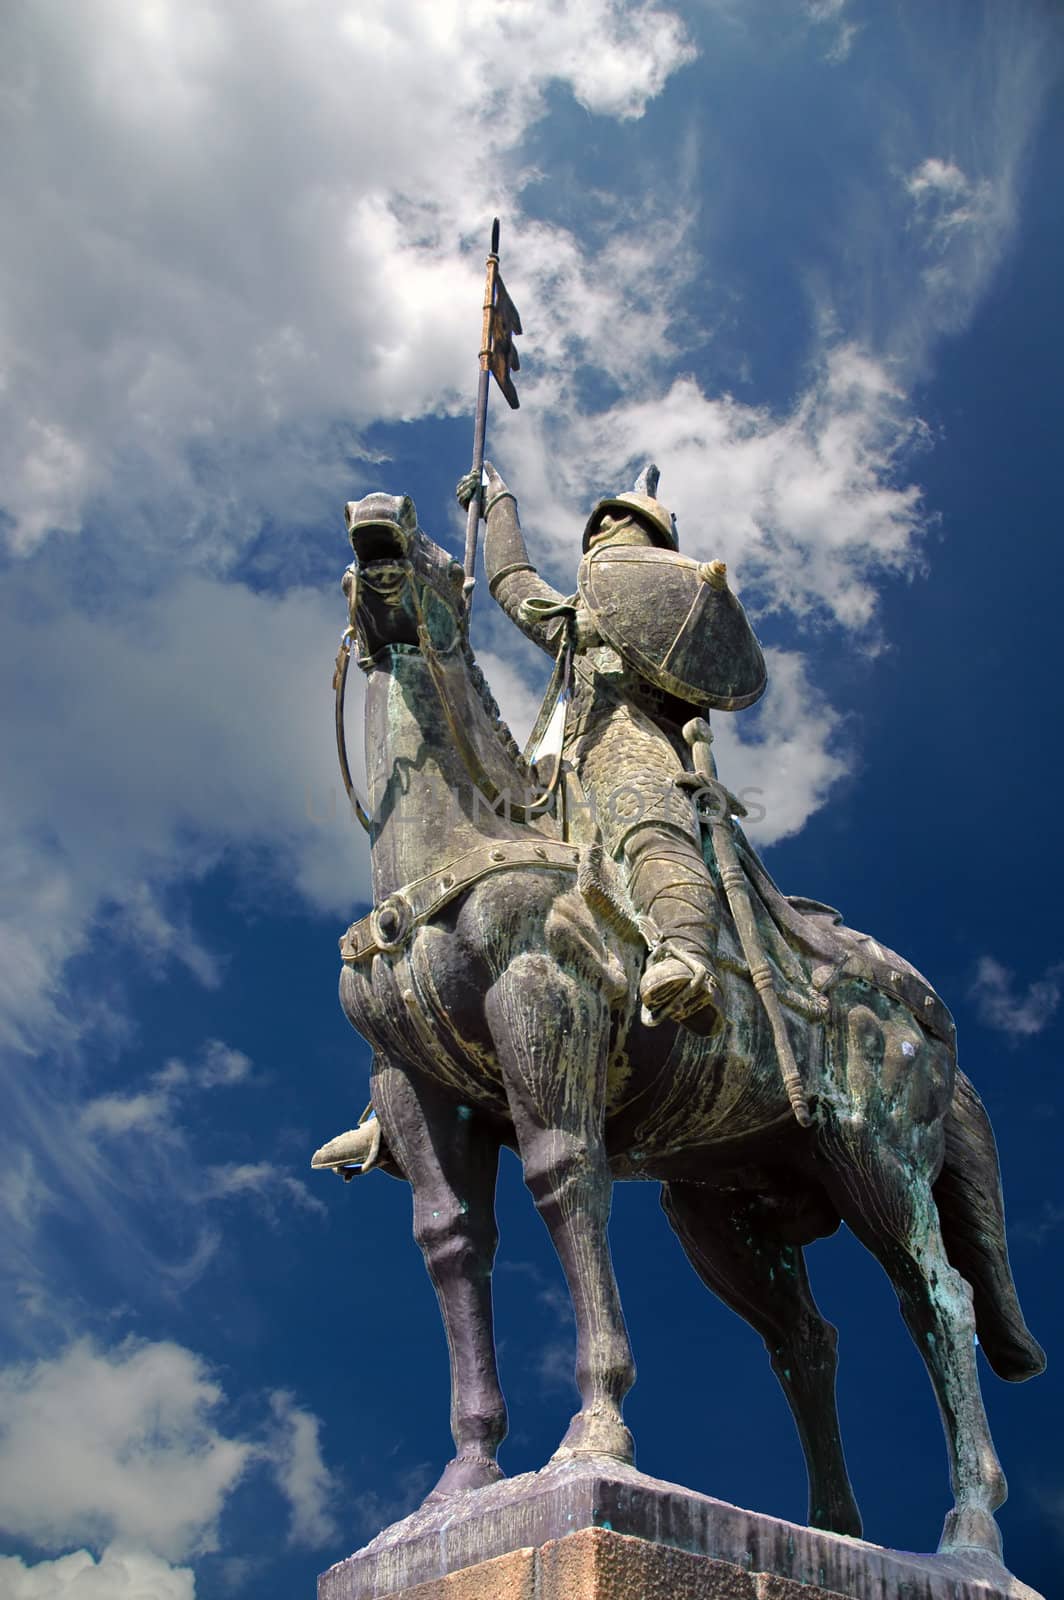 horse knight statue in blue sky with clouds by raalves